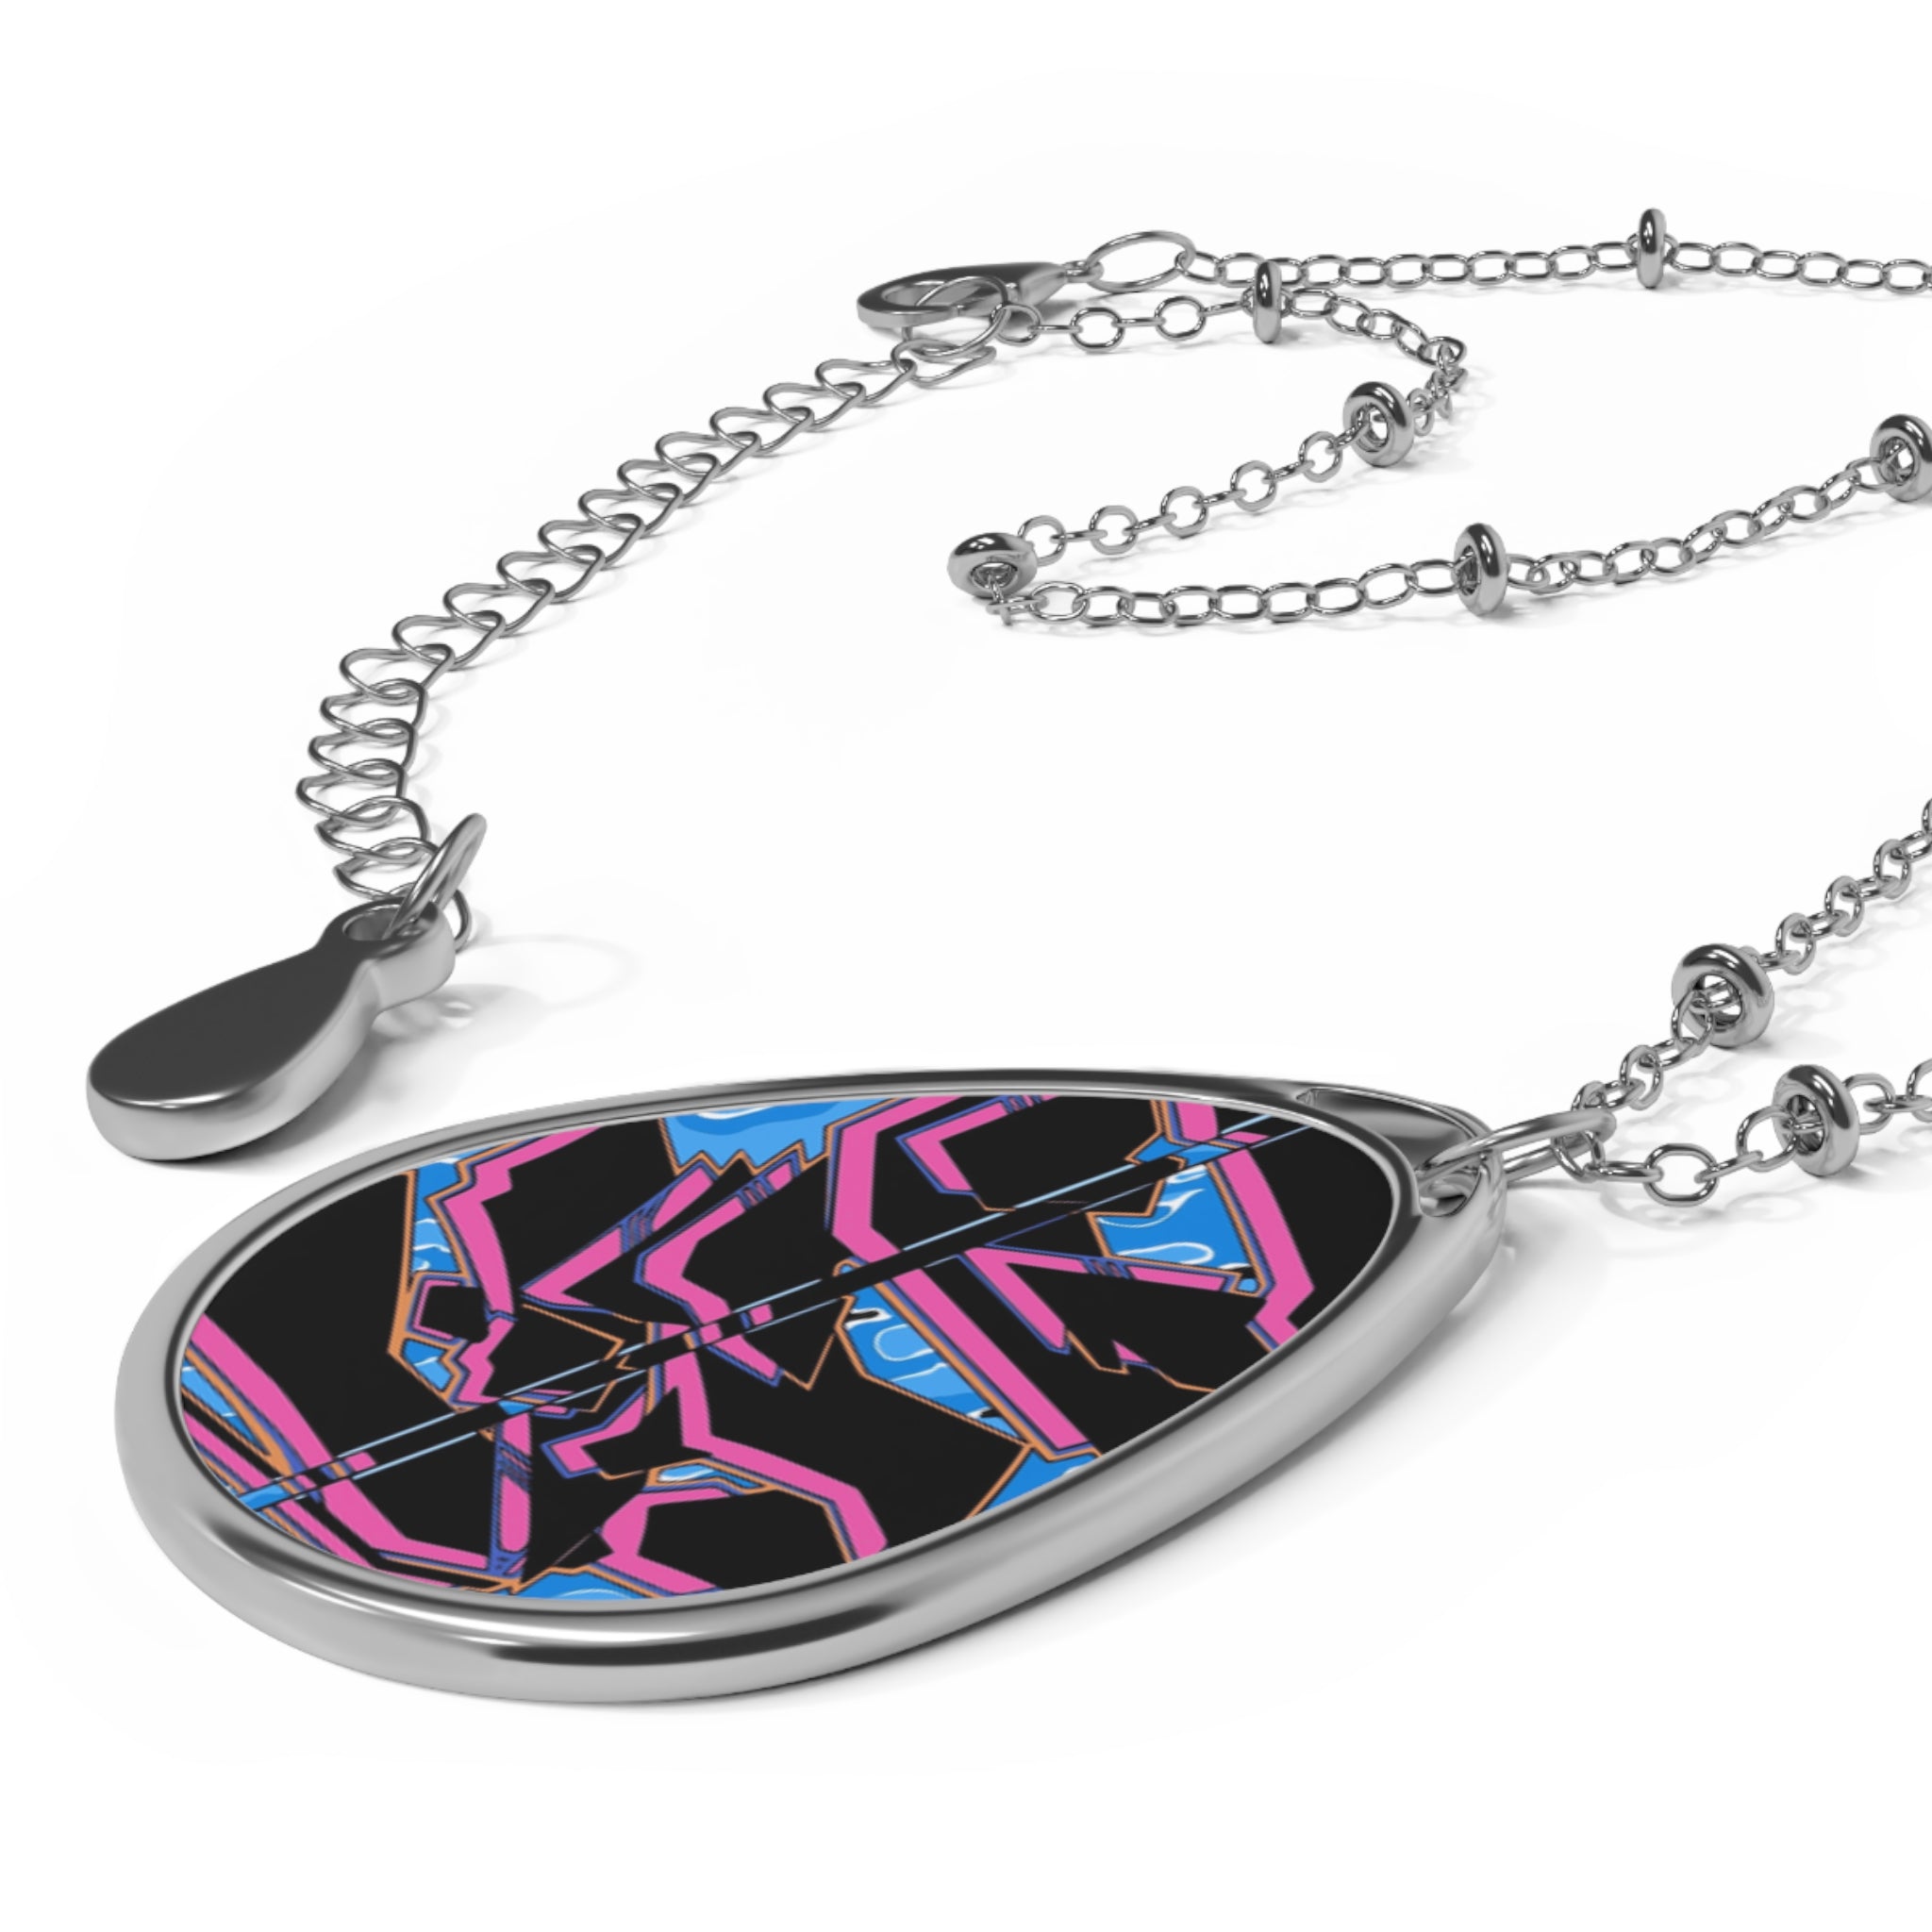 Clean Pendant Necklace by @johnnygraff31